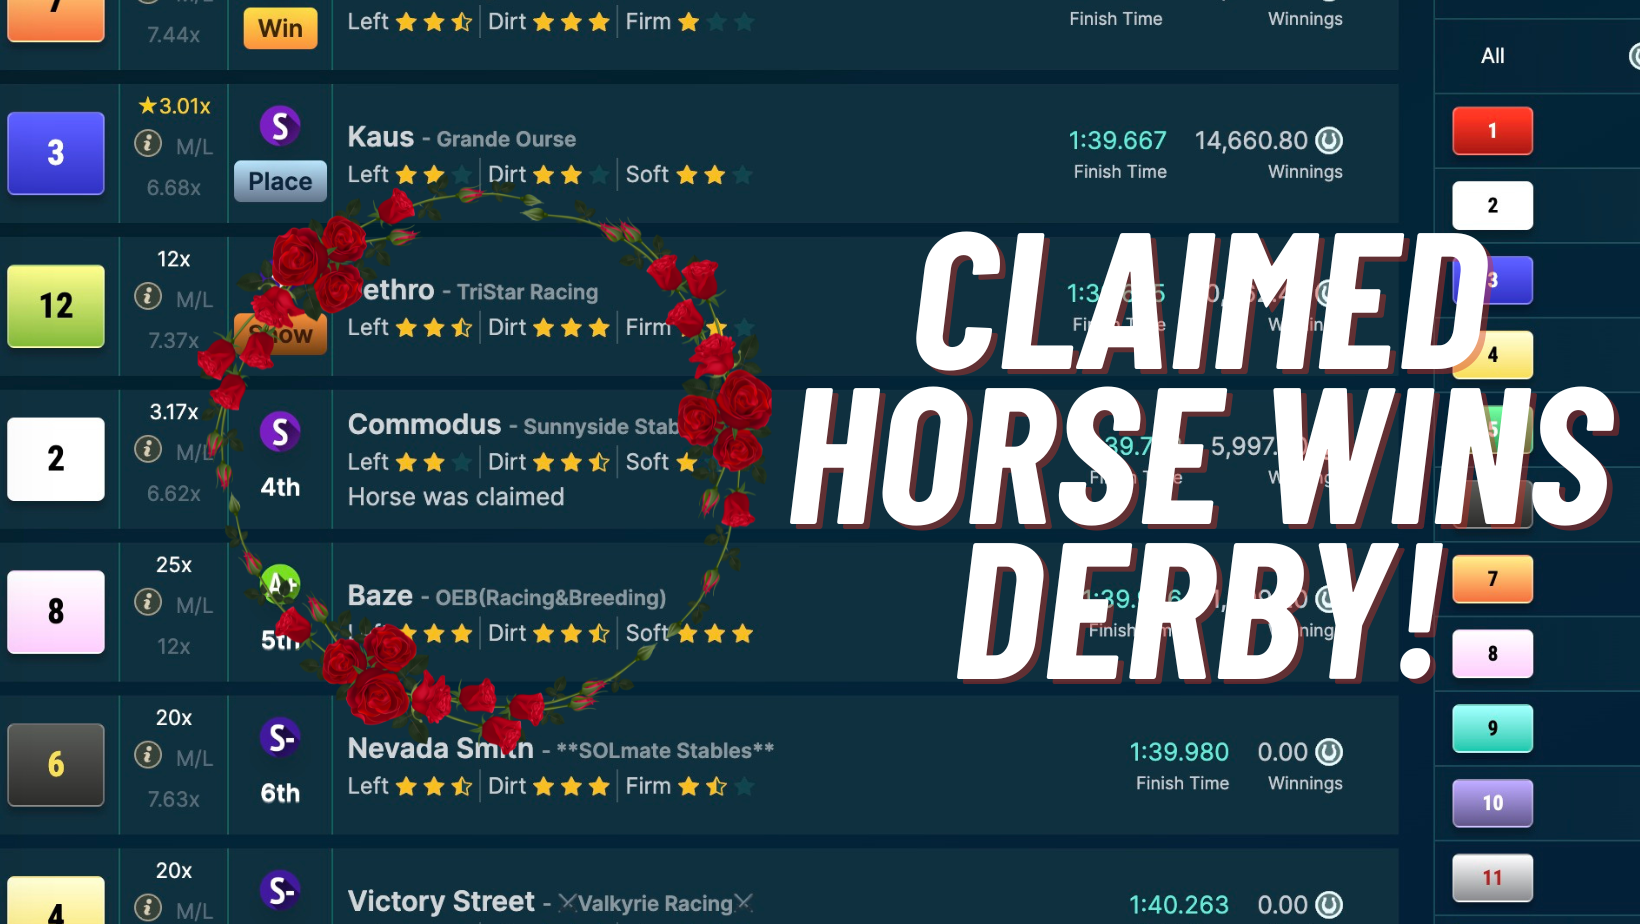 Claimed Horse Wins the Virtual Kentucky Derby